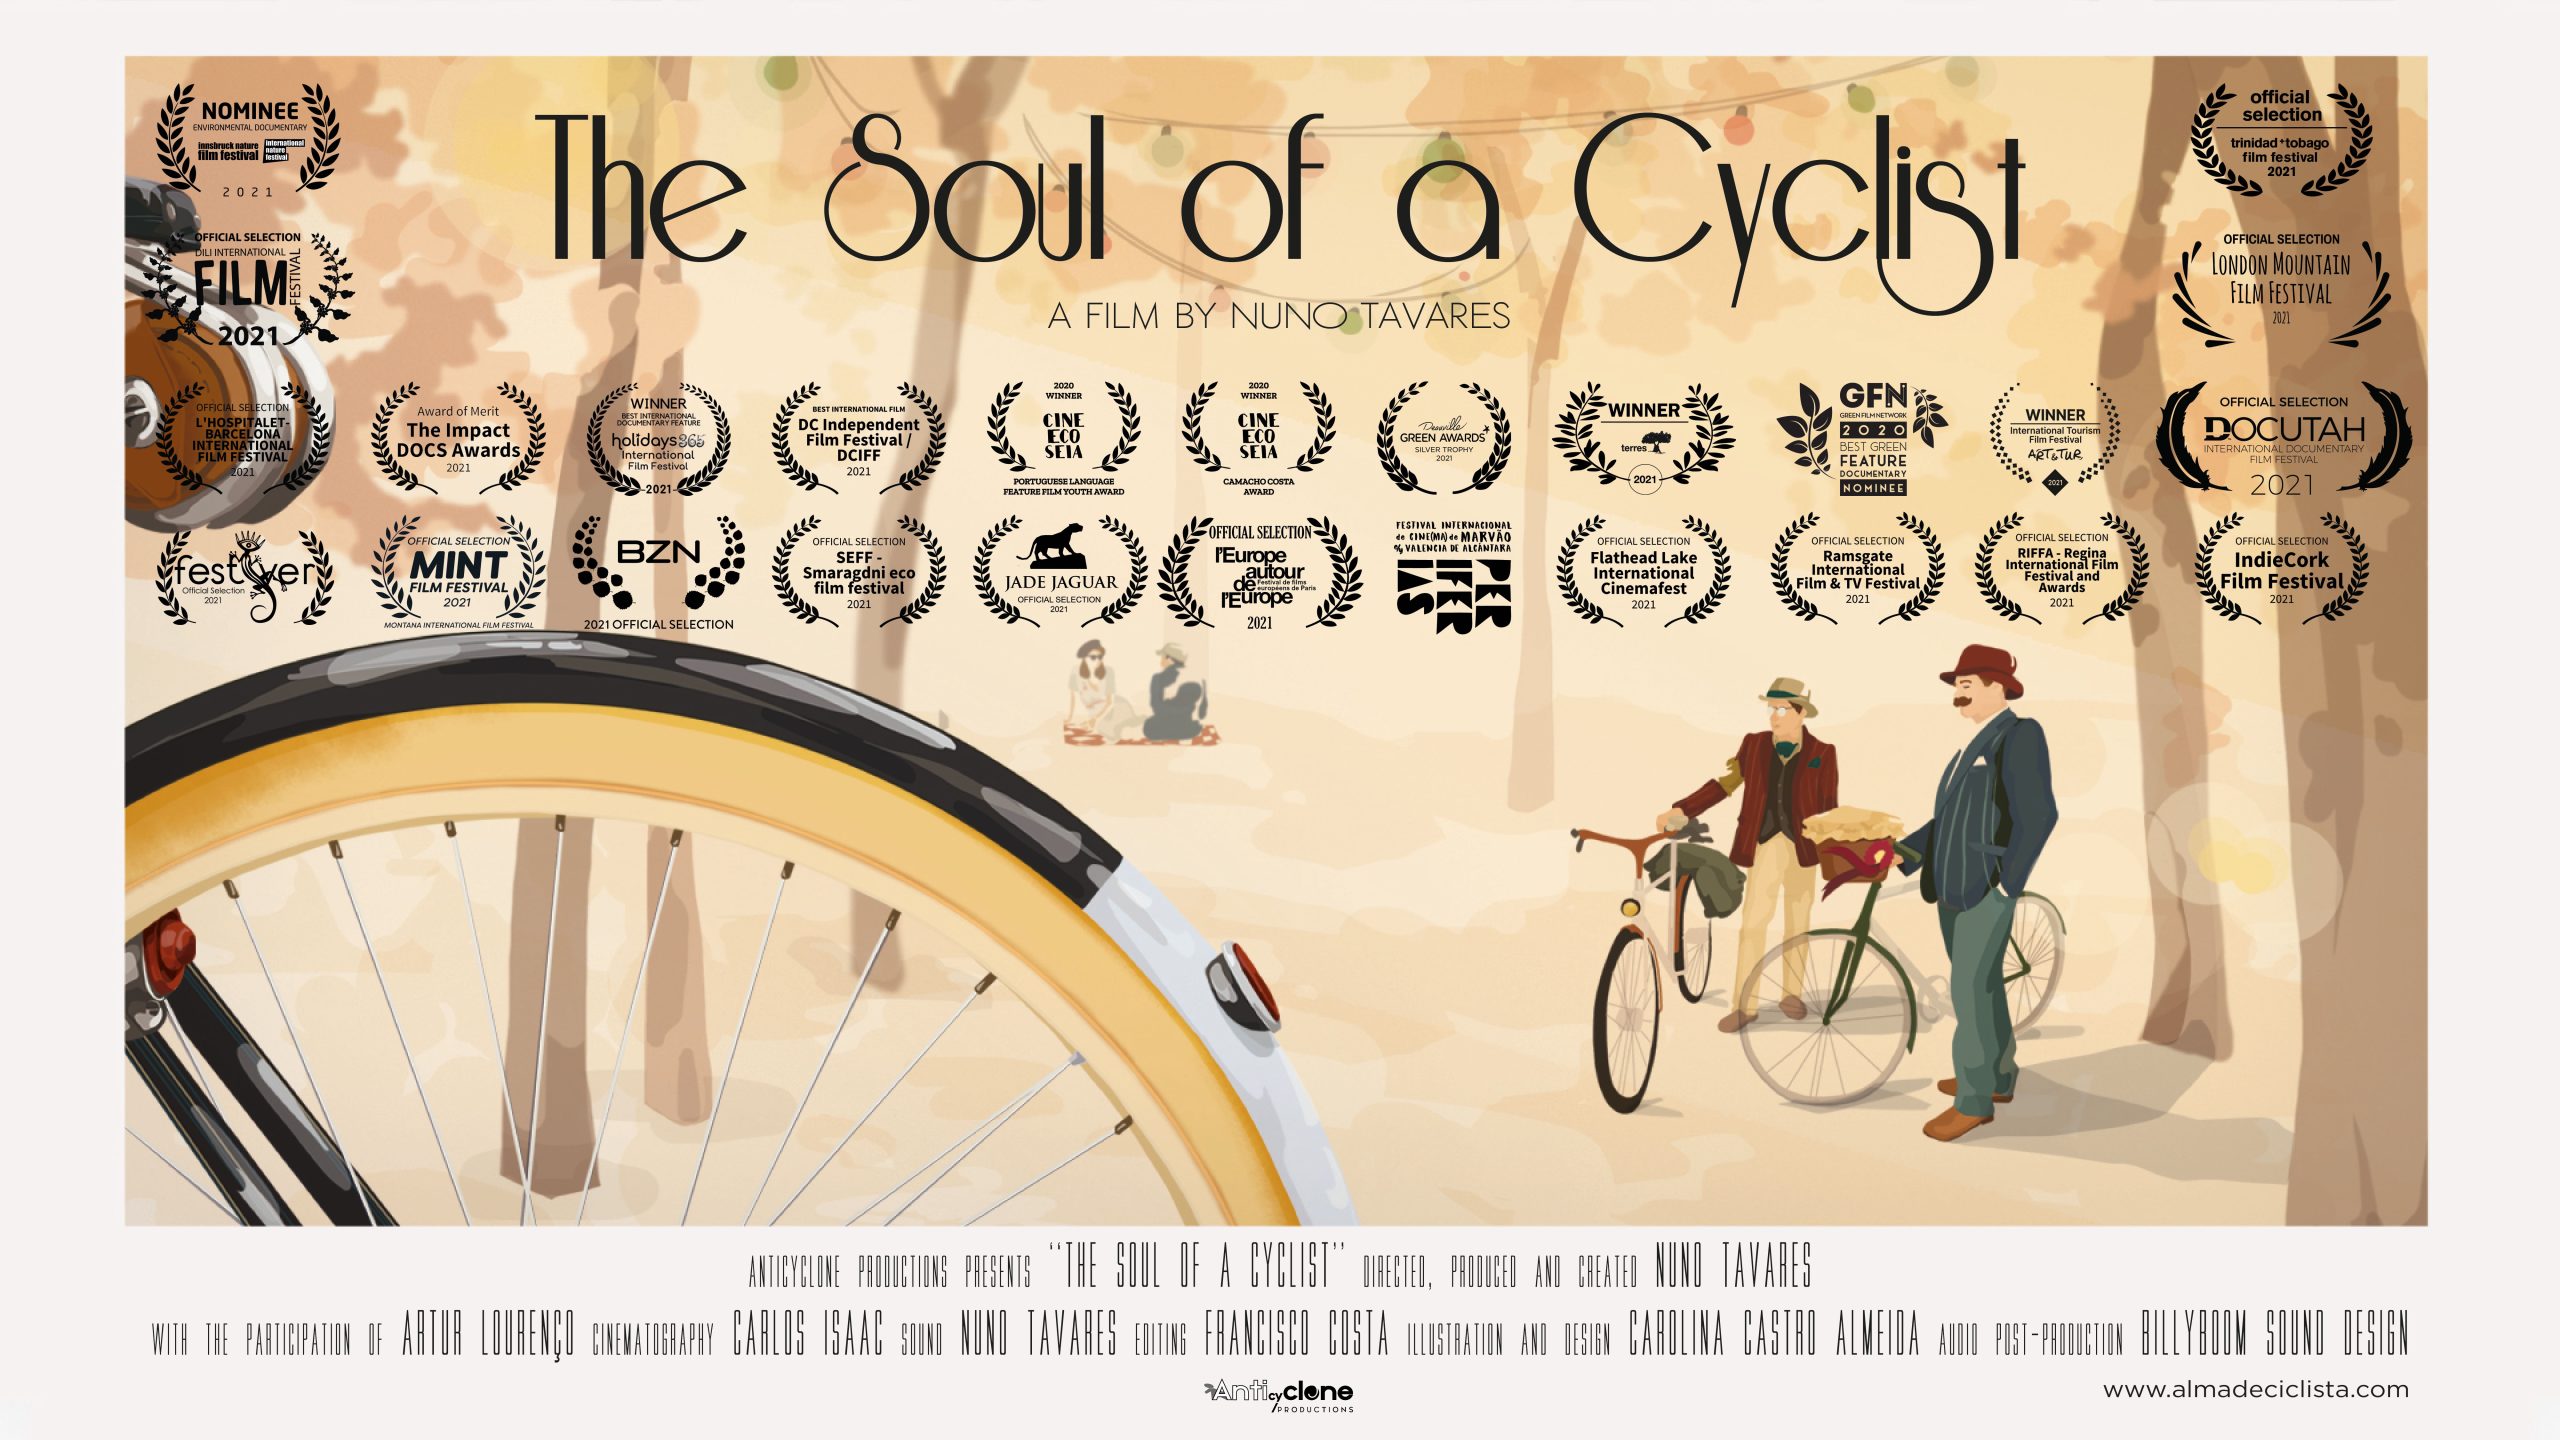 The Soul of a Cyclist